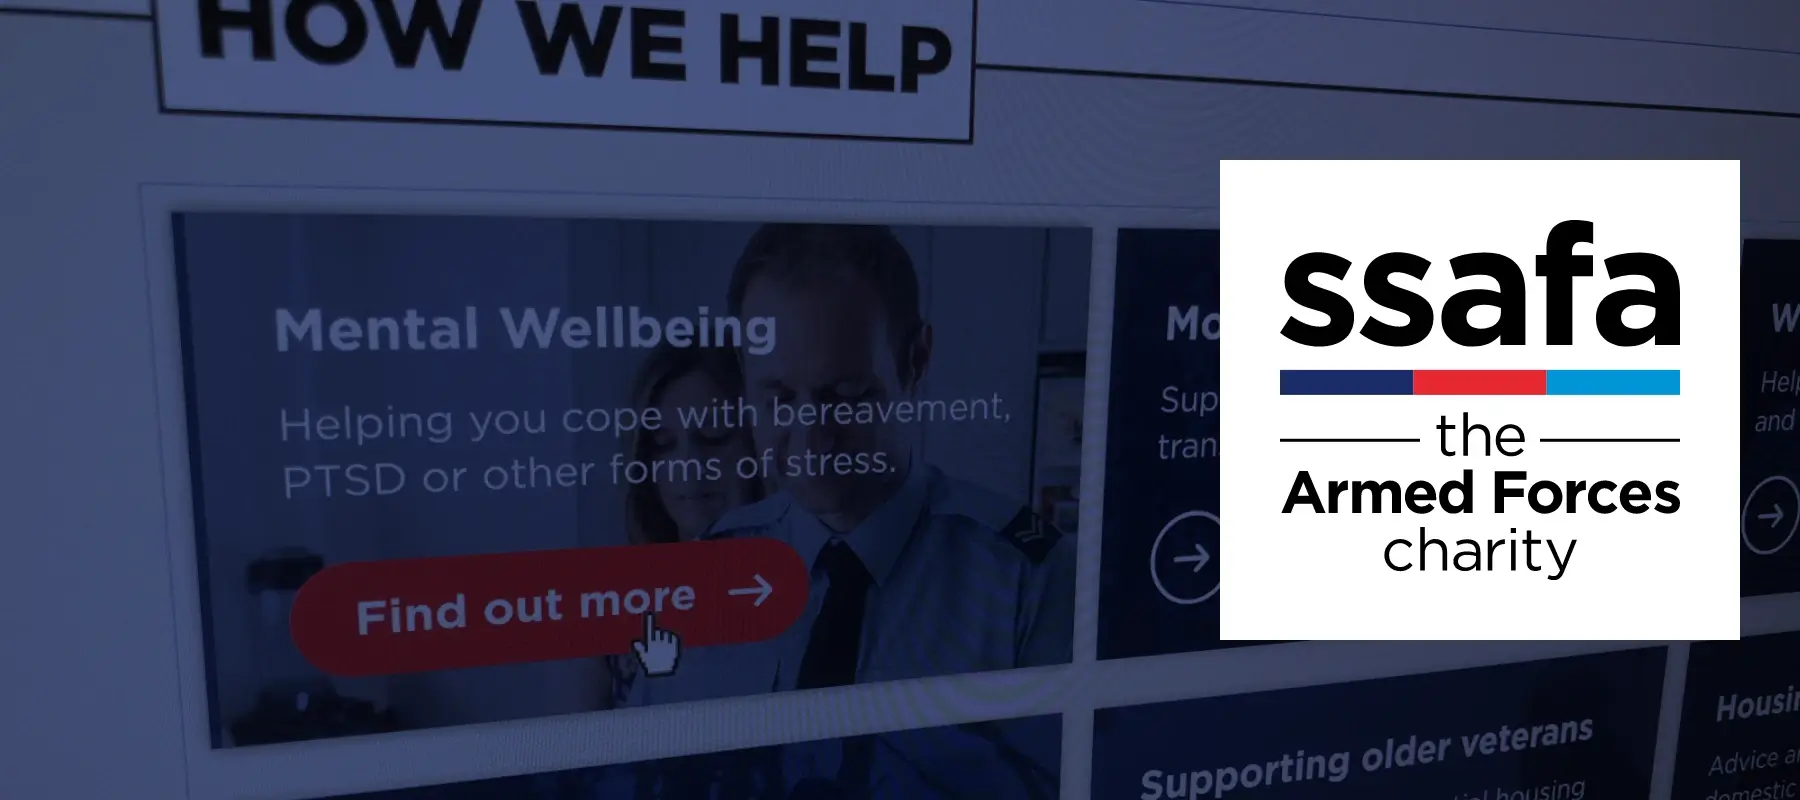 SSAFA, the armed forces charity